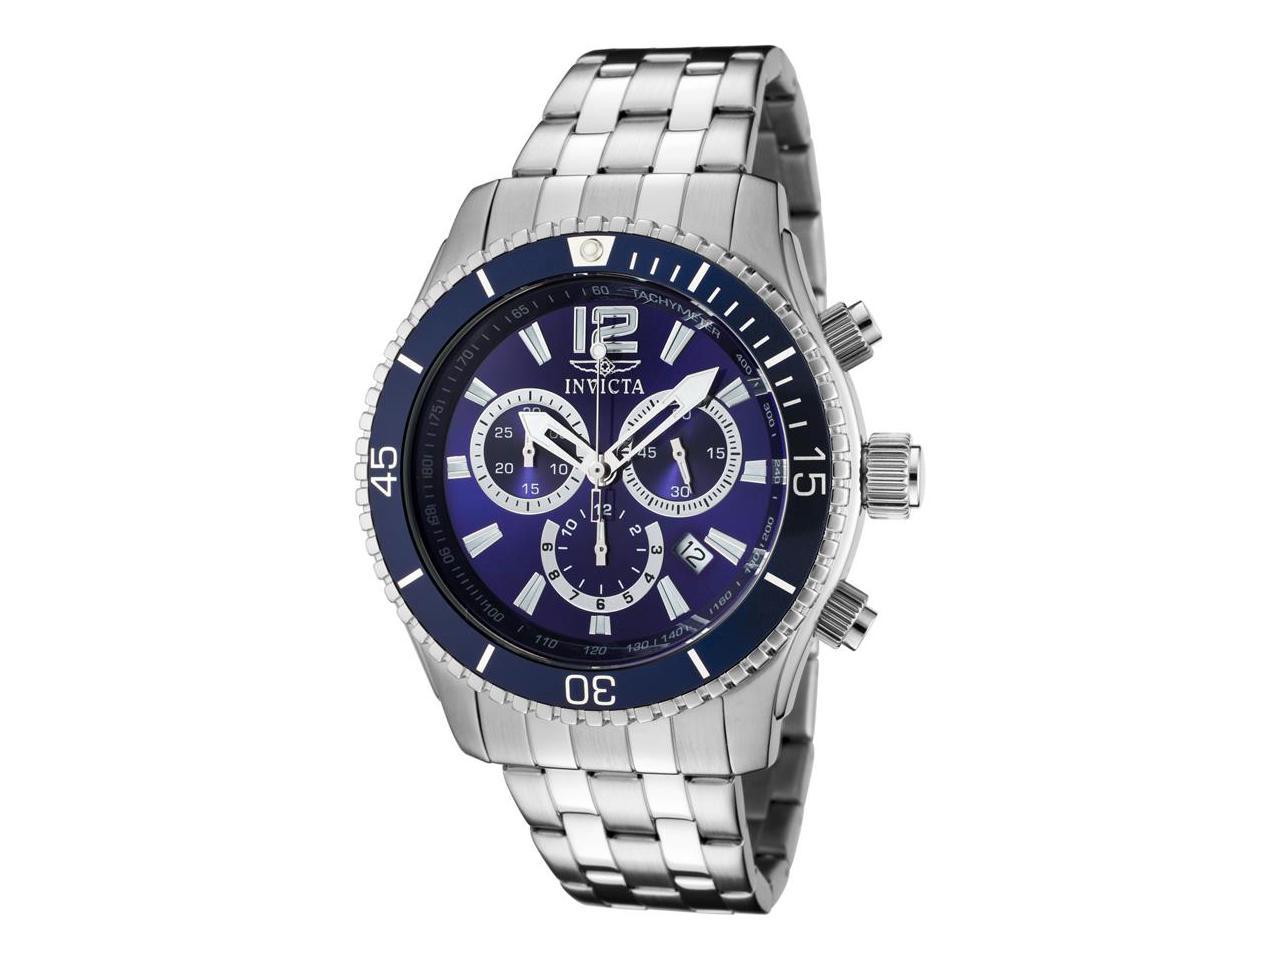 Invicta Specialty 0620 Stainless Steel Chronograph Watch - Newegg.com